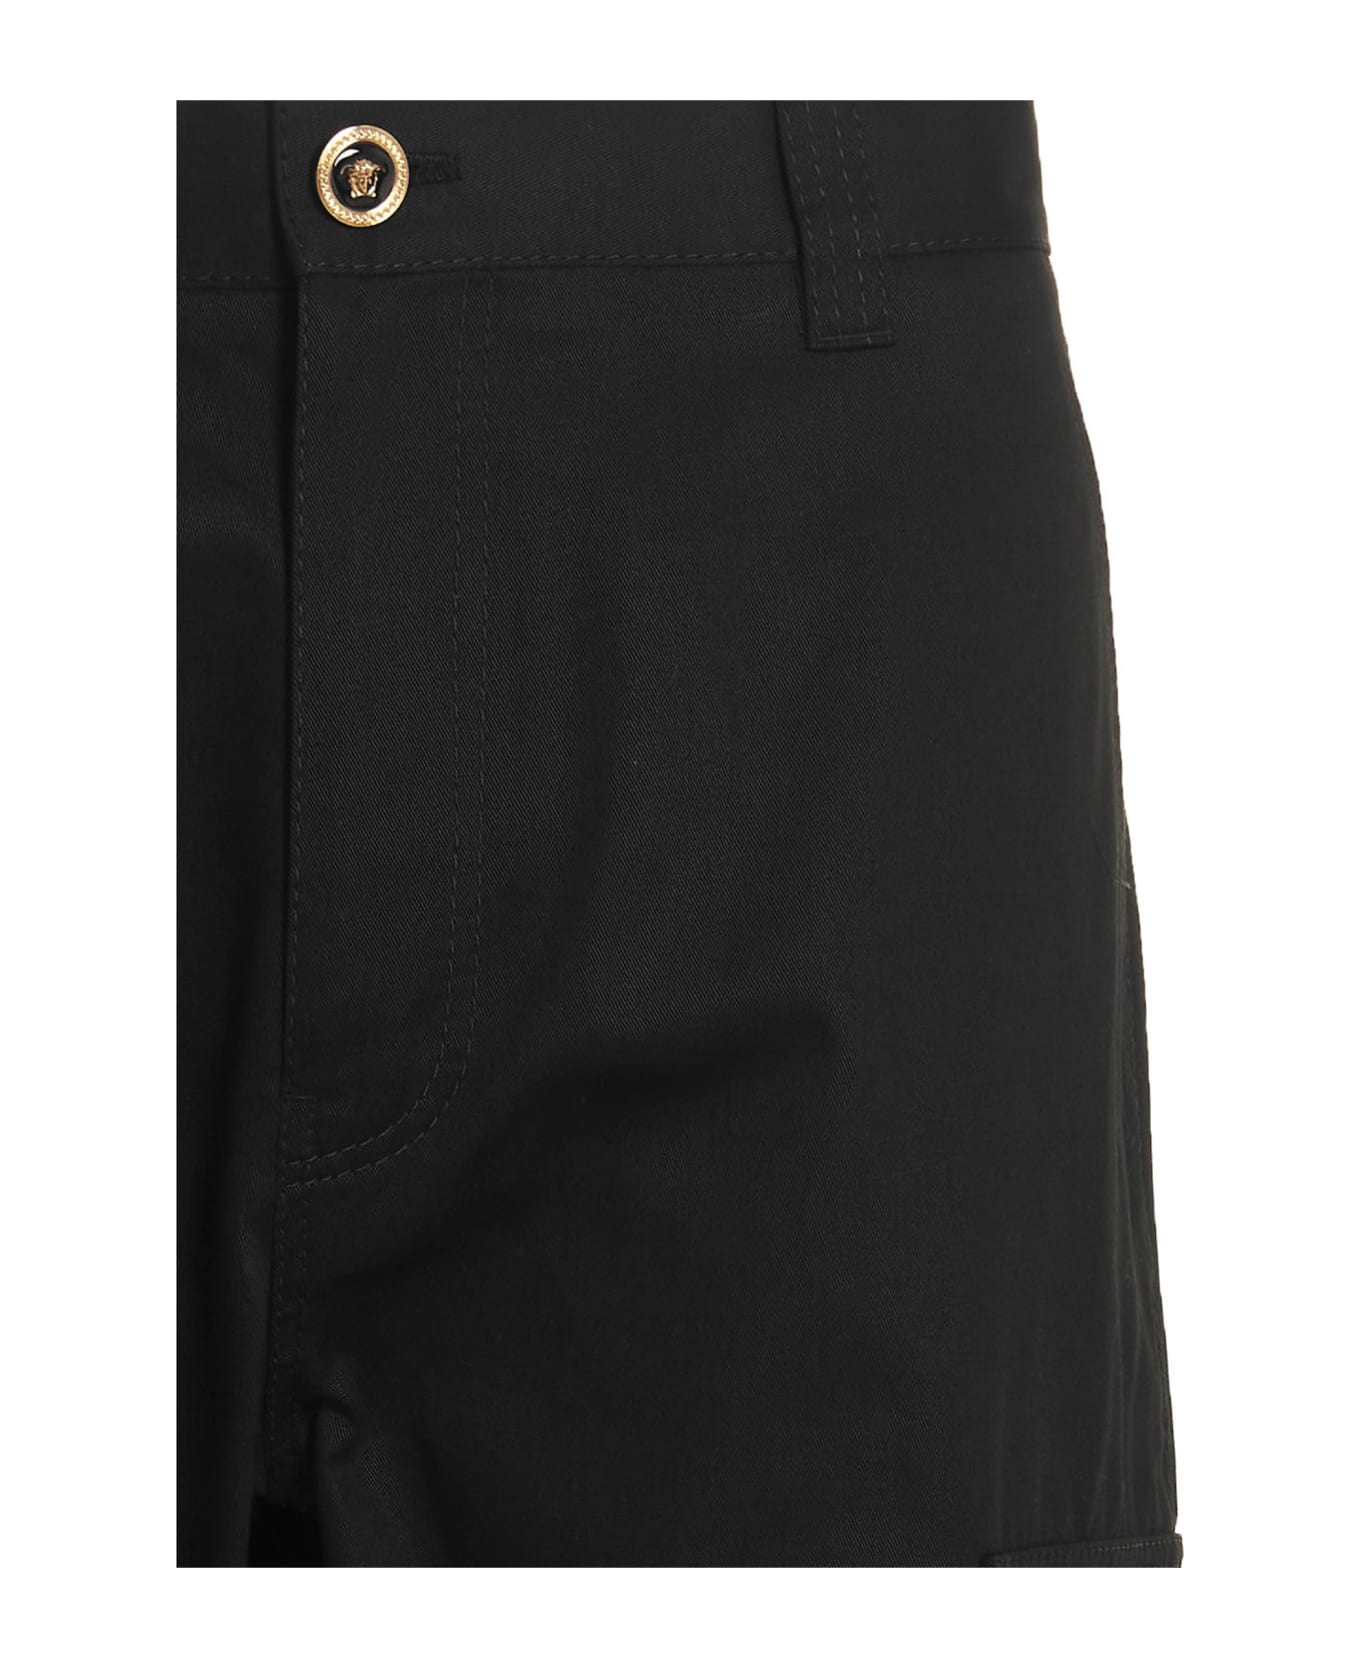 Versace Logo Button Trousers - BLACK ボトムス